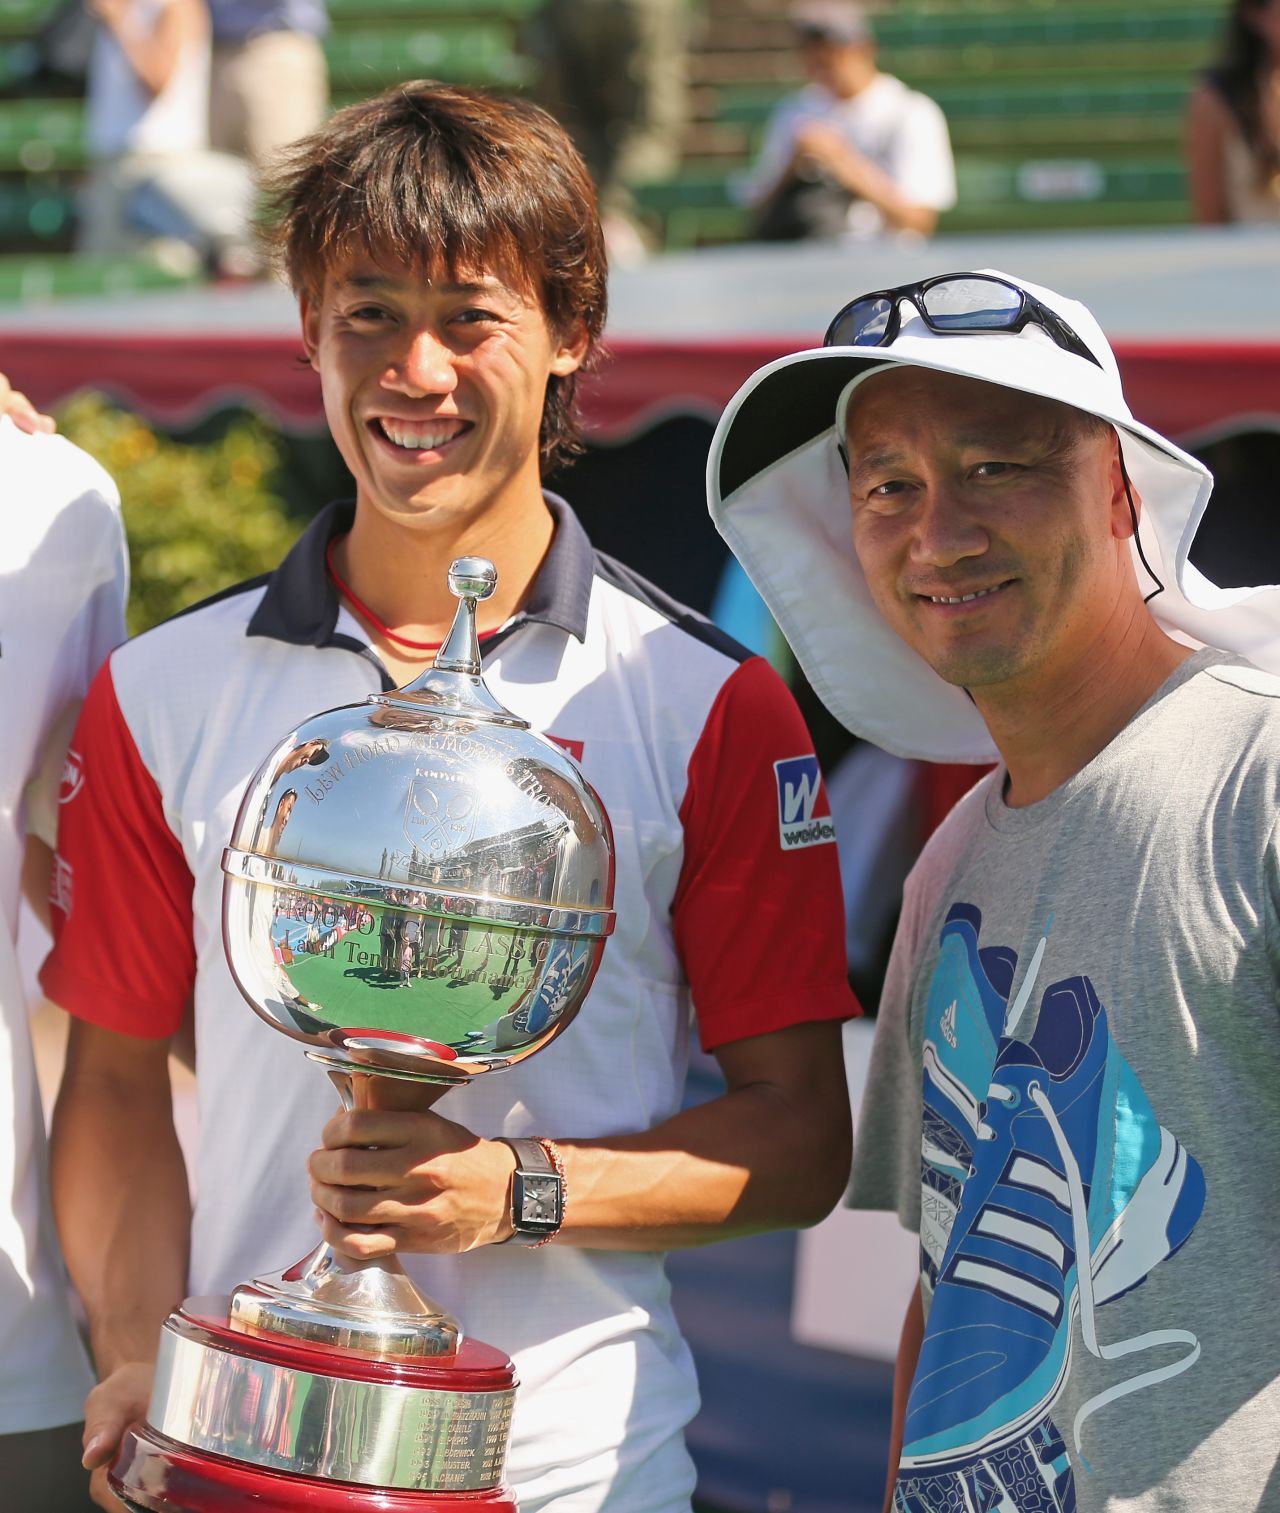 Michael Chang (right), who stunned Edberg in the 1989 French Open final as a teenager, took up a coaching role with rising Japanese star Nishikori in December 2013. Nishikori made it to the semifinals of the season-ending  ATP World Tour Finals in 2014, and reached a career-high fourth in the rankings in March this year.